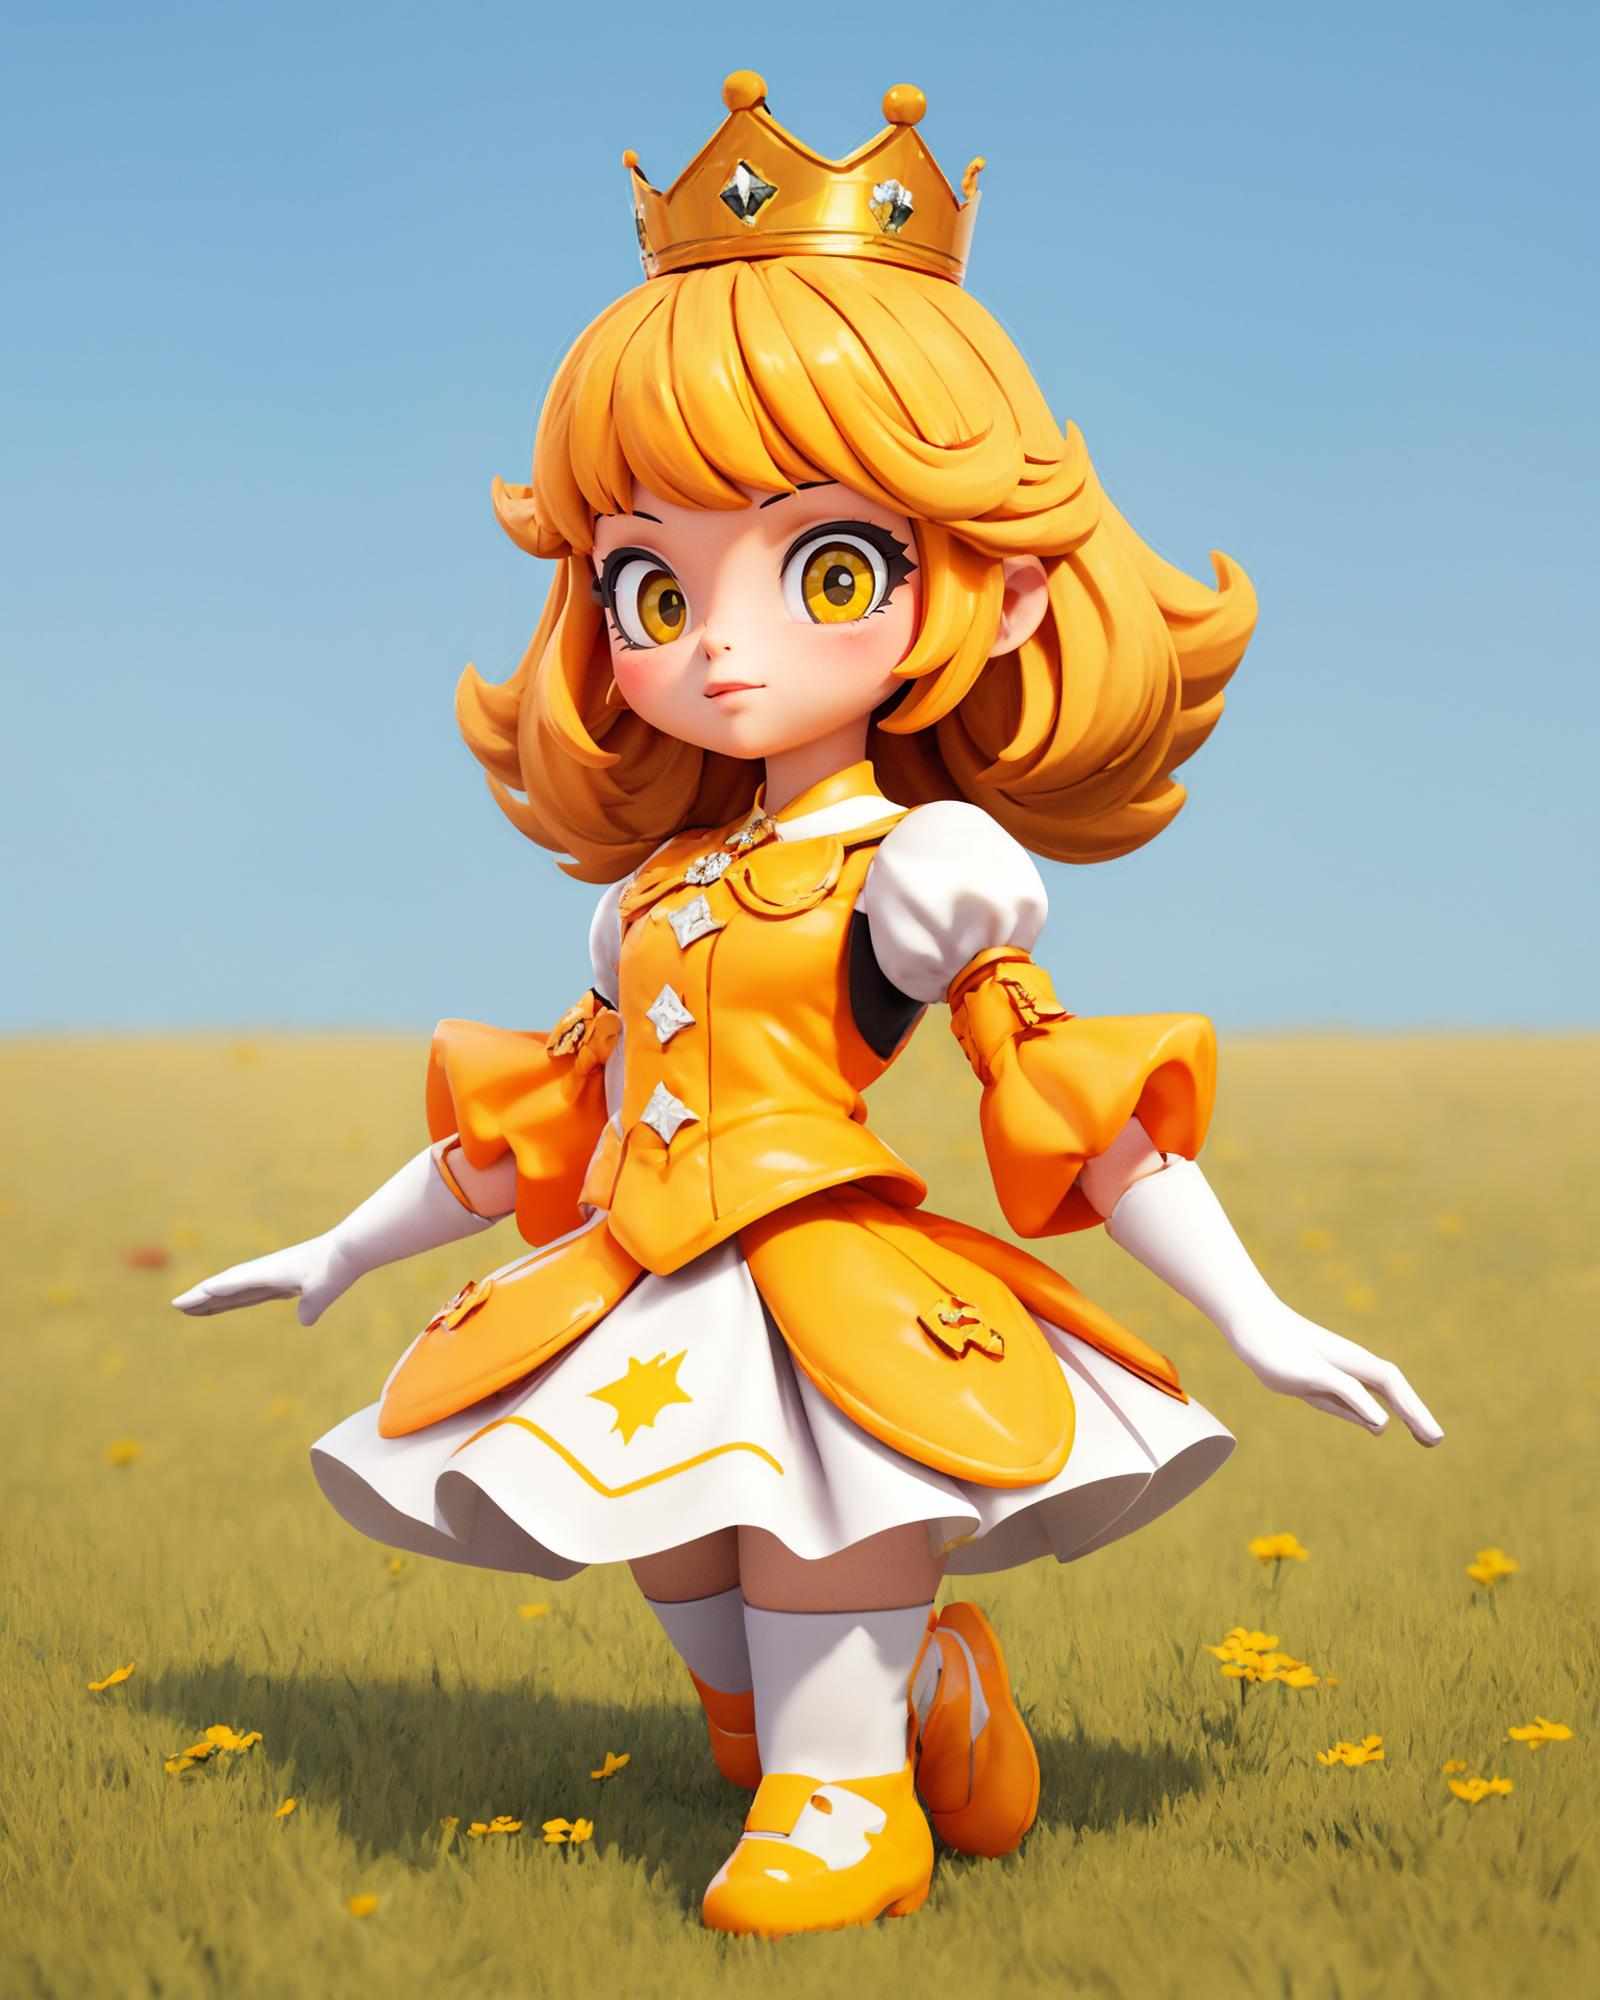 A Yellow Doll Wearing a Crown, Dress, and Boots, Standing in a Field of Yellow Flowers